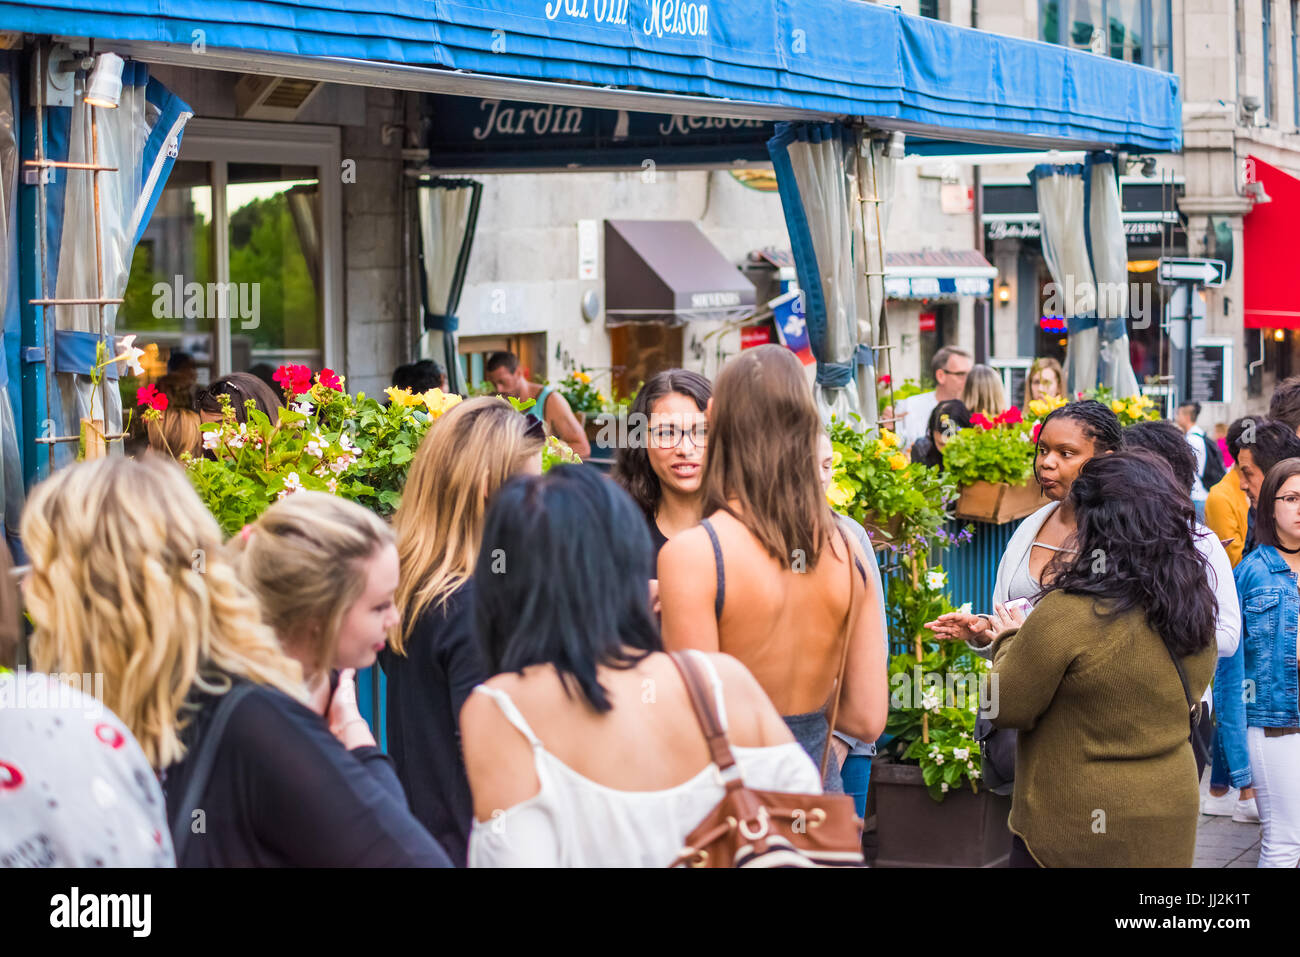 Montreal, Canada - May 27, 2017: Old town area Jacques Cartier square with people waiting in line queue outside restaurant called Jardin Nelson during Stock Photo